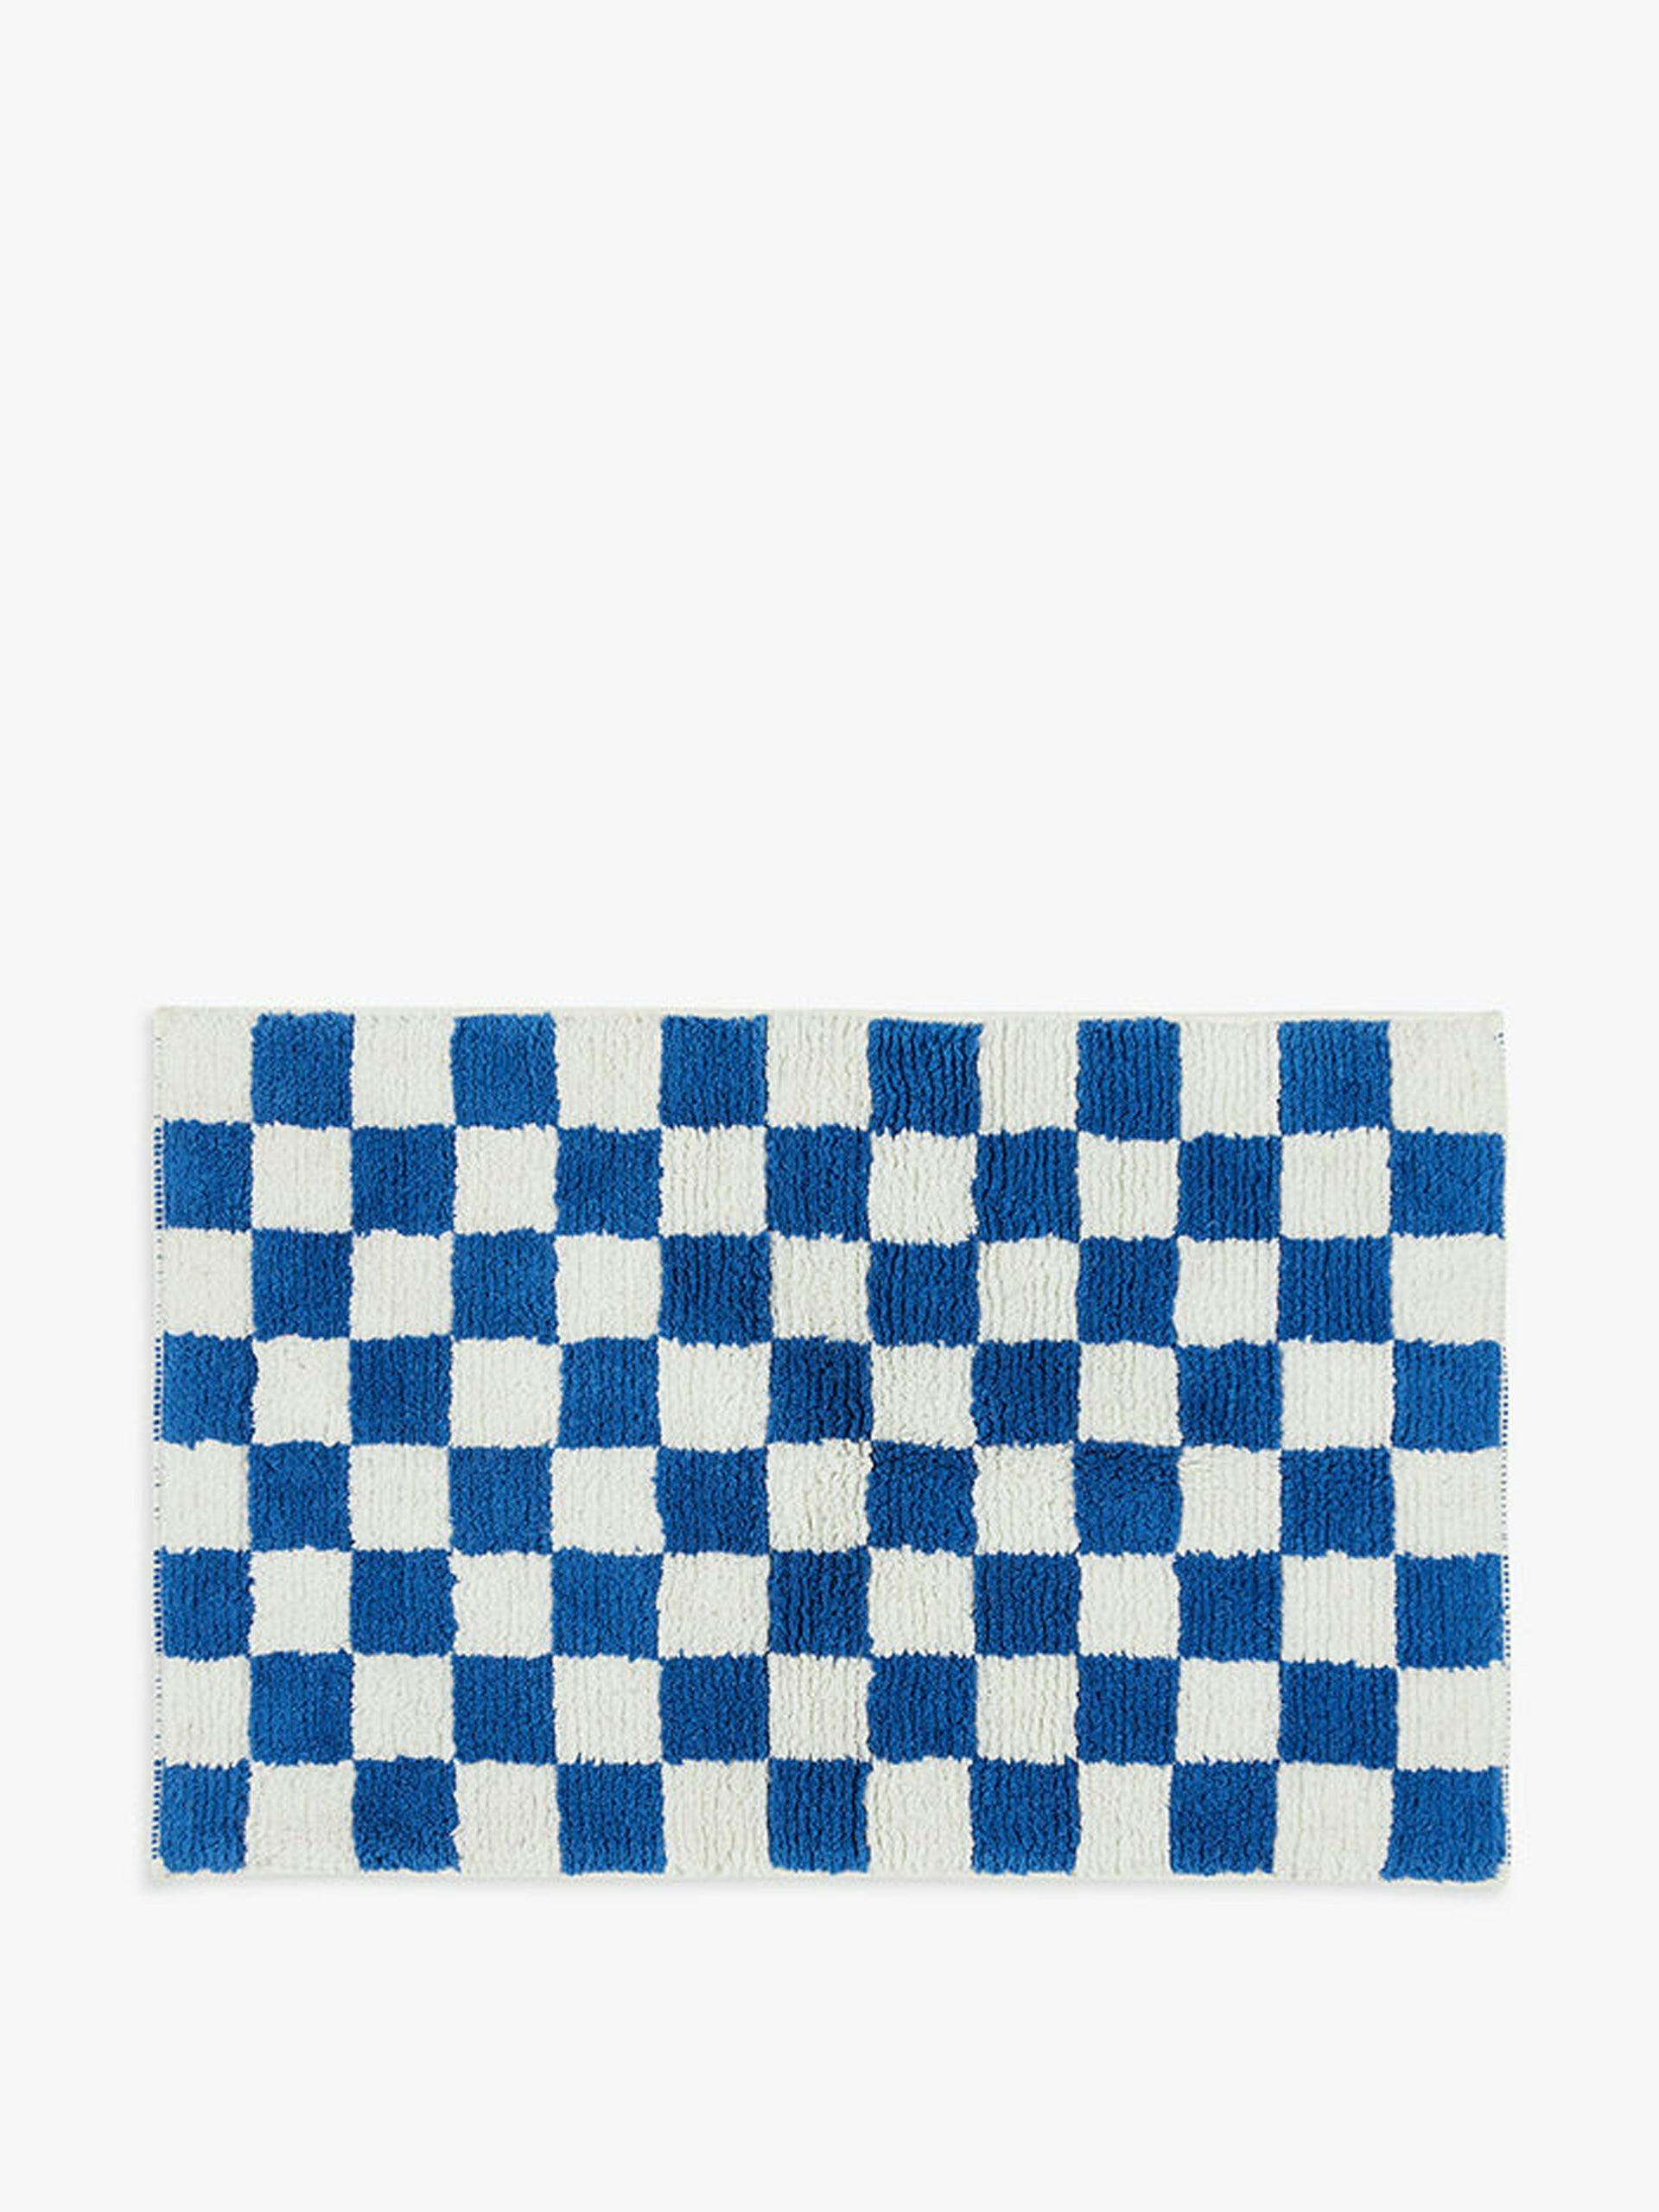 Blue and white checkerboard mat